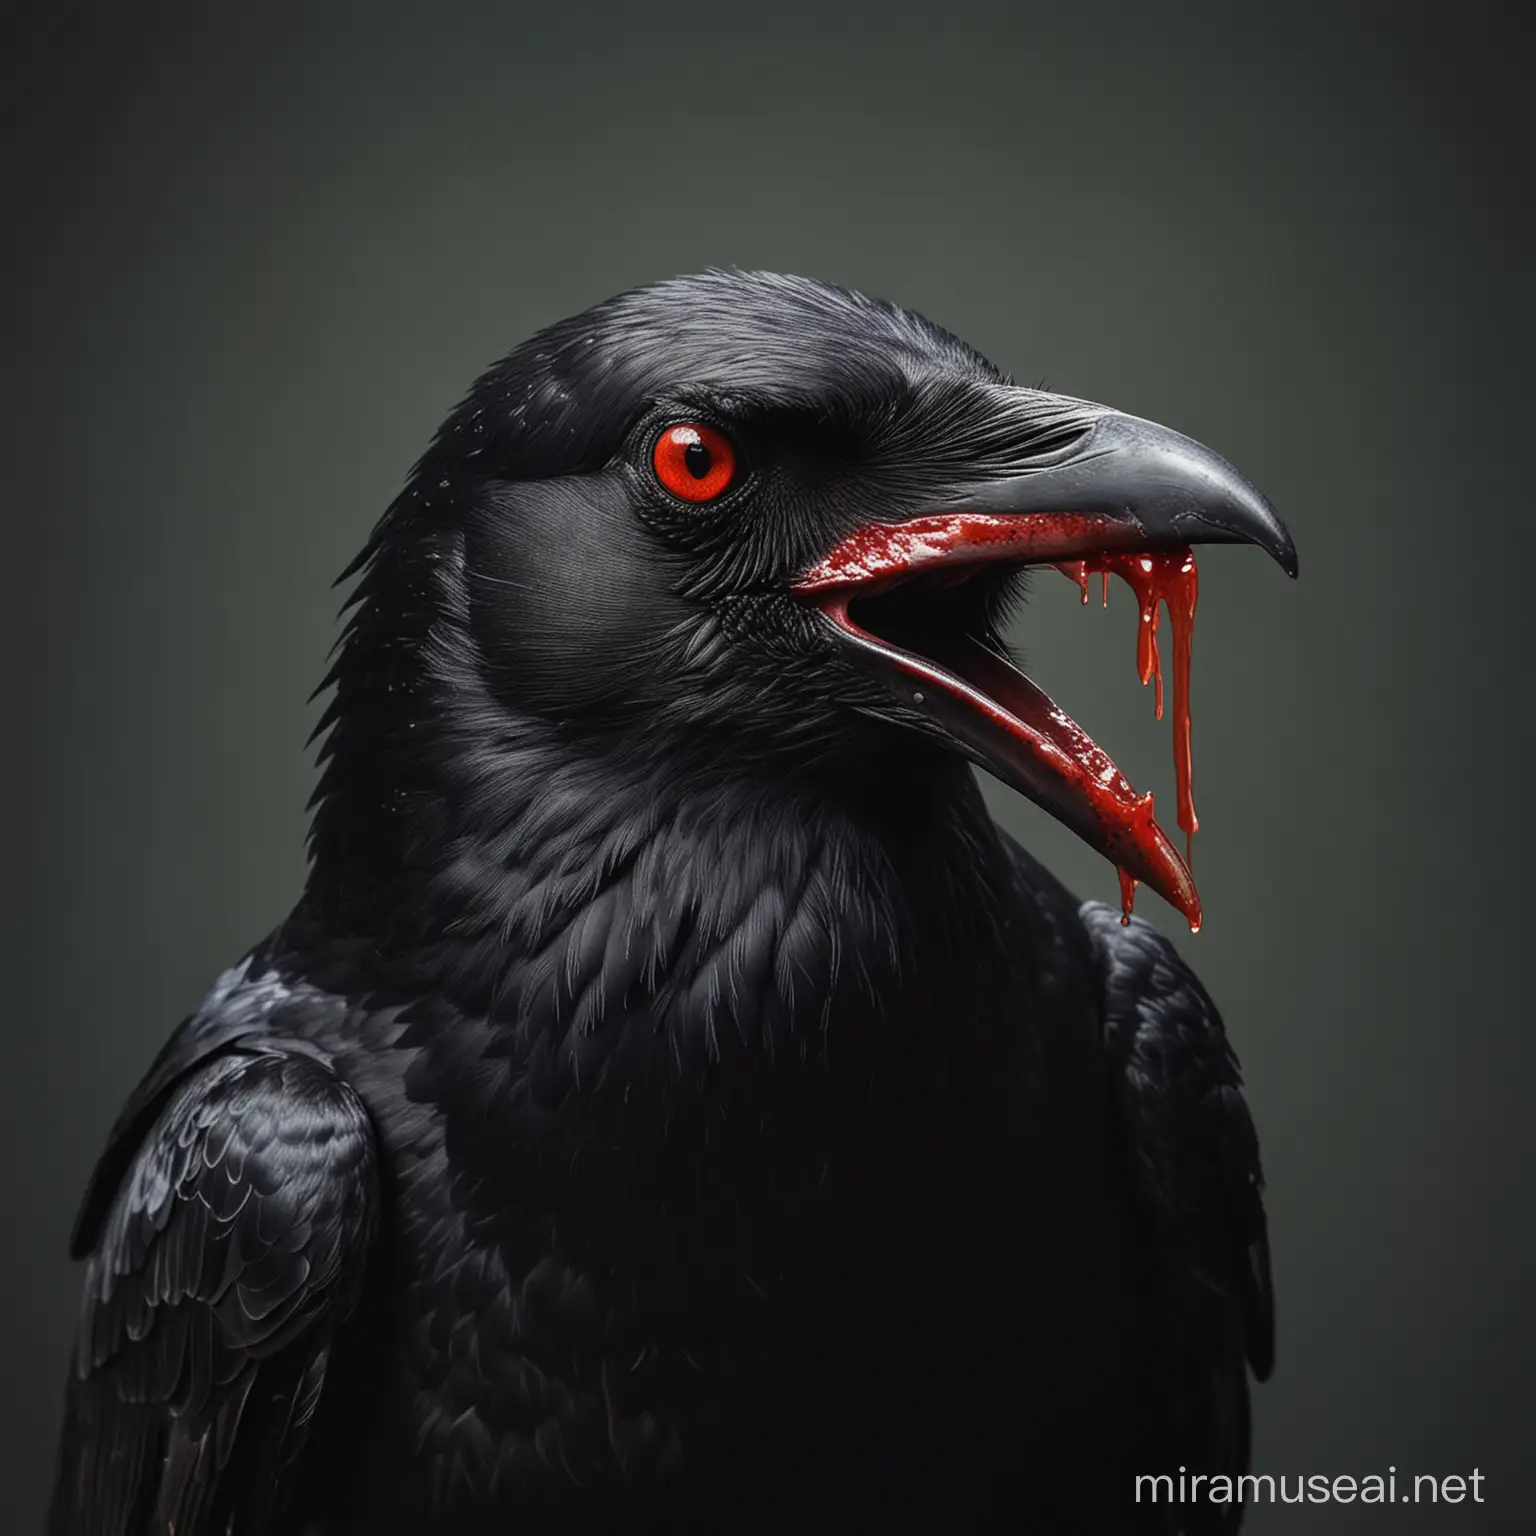 Sinister Crow with Red Eyes and Bloody Beak in Dramatic Lighting